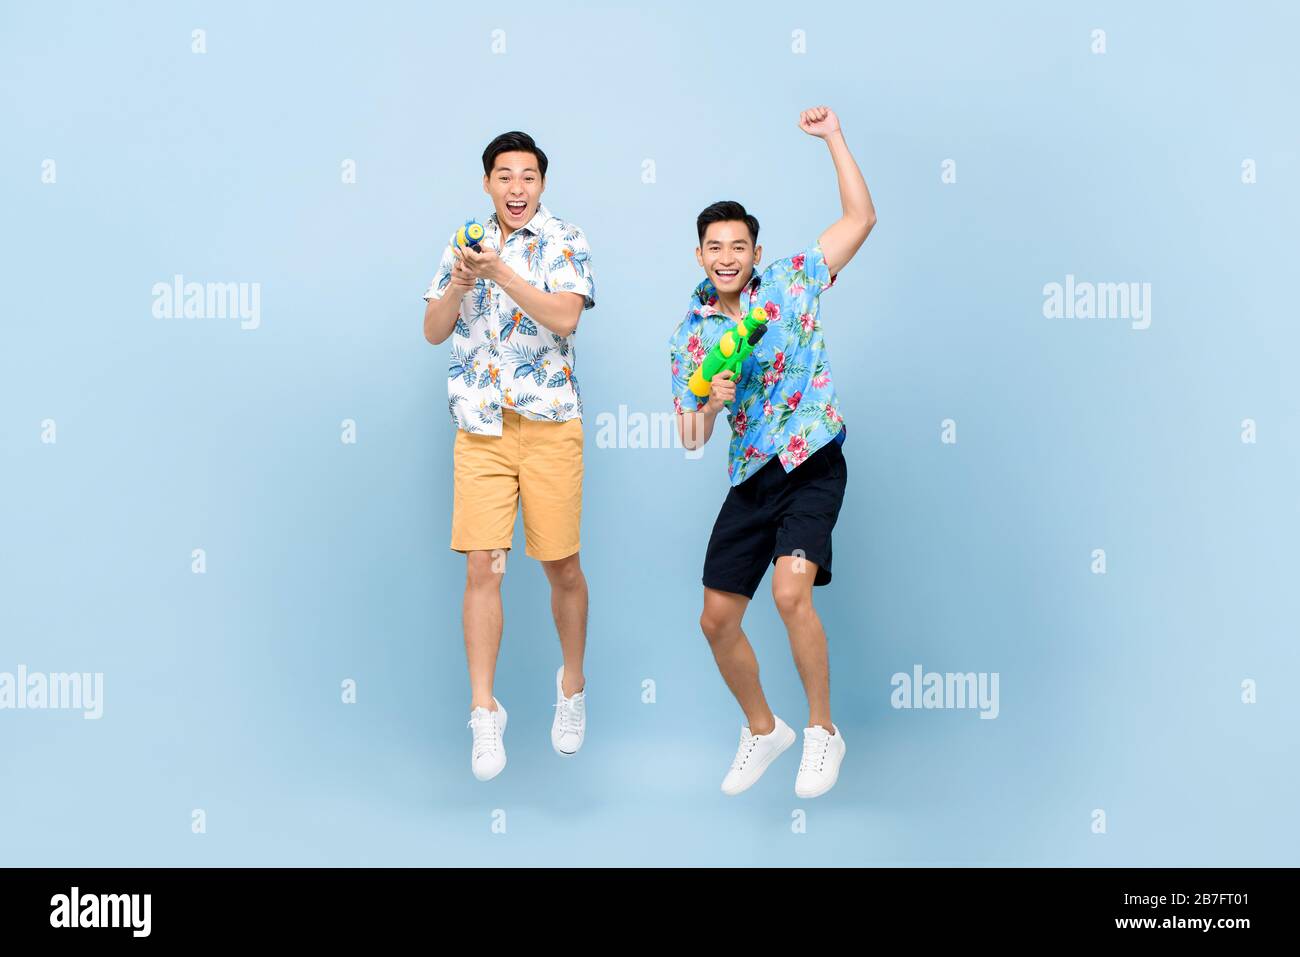 Smilng happy Asian male friends playing with water guns and jumping in blue isolated background for Songkran festival in Thailand and southeast Asia Stock Photo